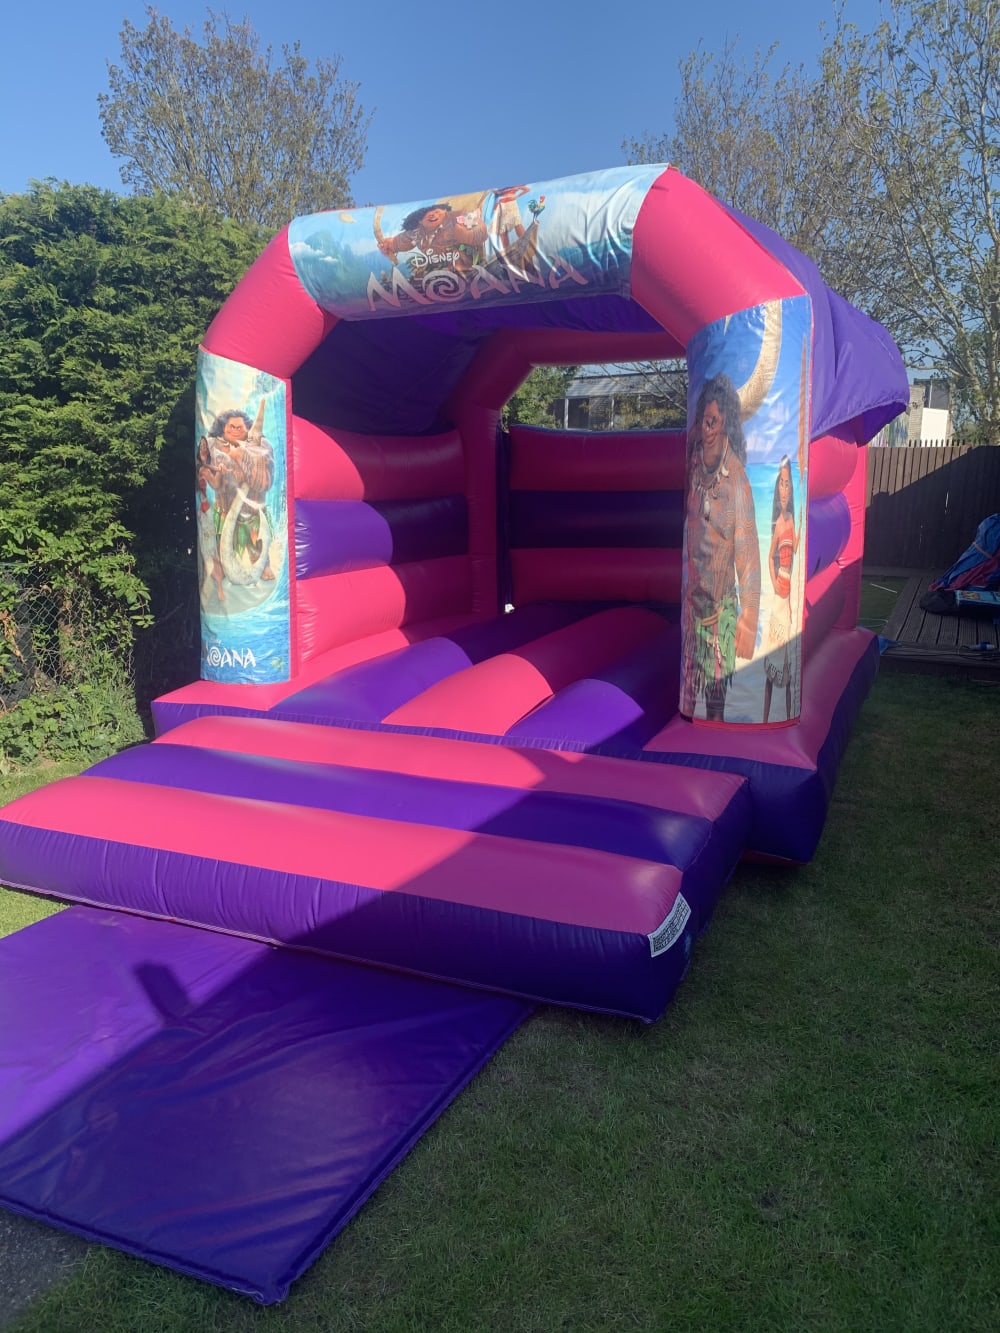 Moana Themed Pink Bouncy Castle Bouncy Castle Soft Play Hire In Chelmsford Maldon Southend Woodham Ferrers Billericay Brentwood Briaintree